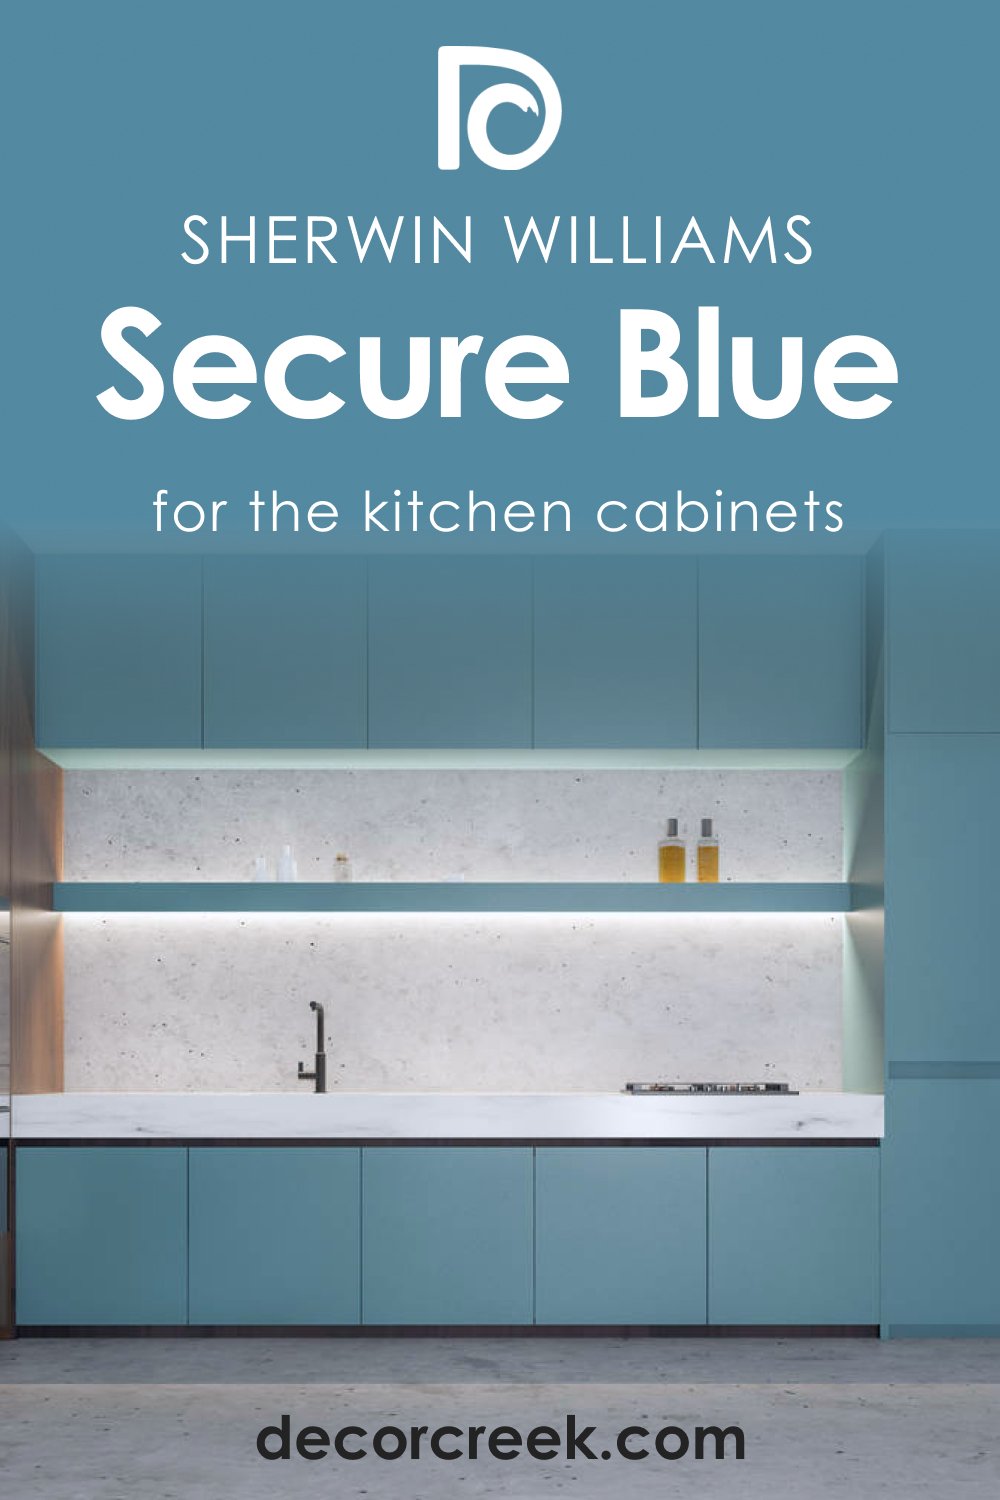 How to Use Secure Blue SW 6508 for the Kitchen Cabinets?